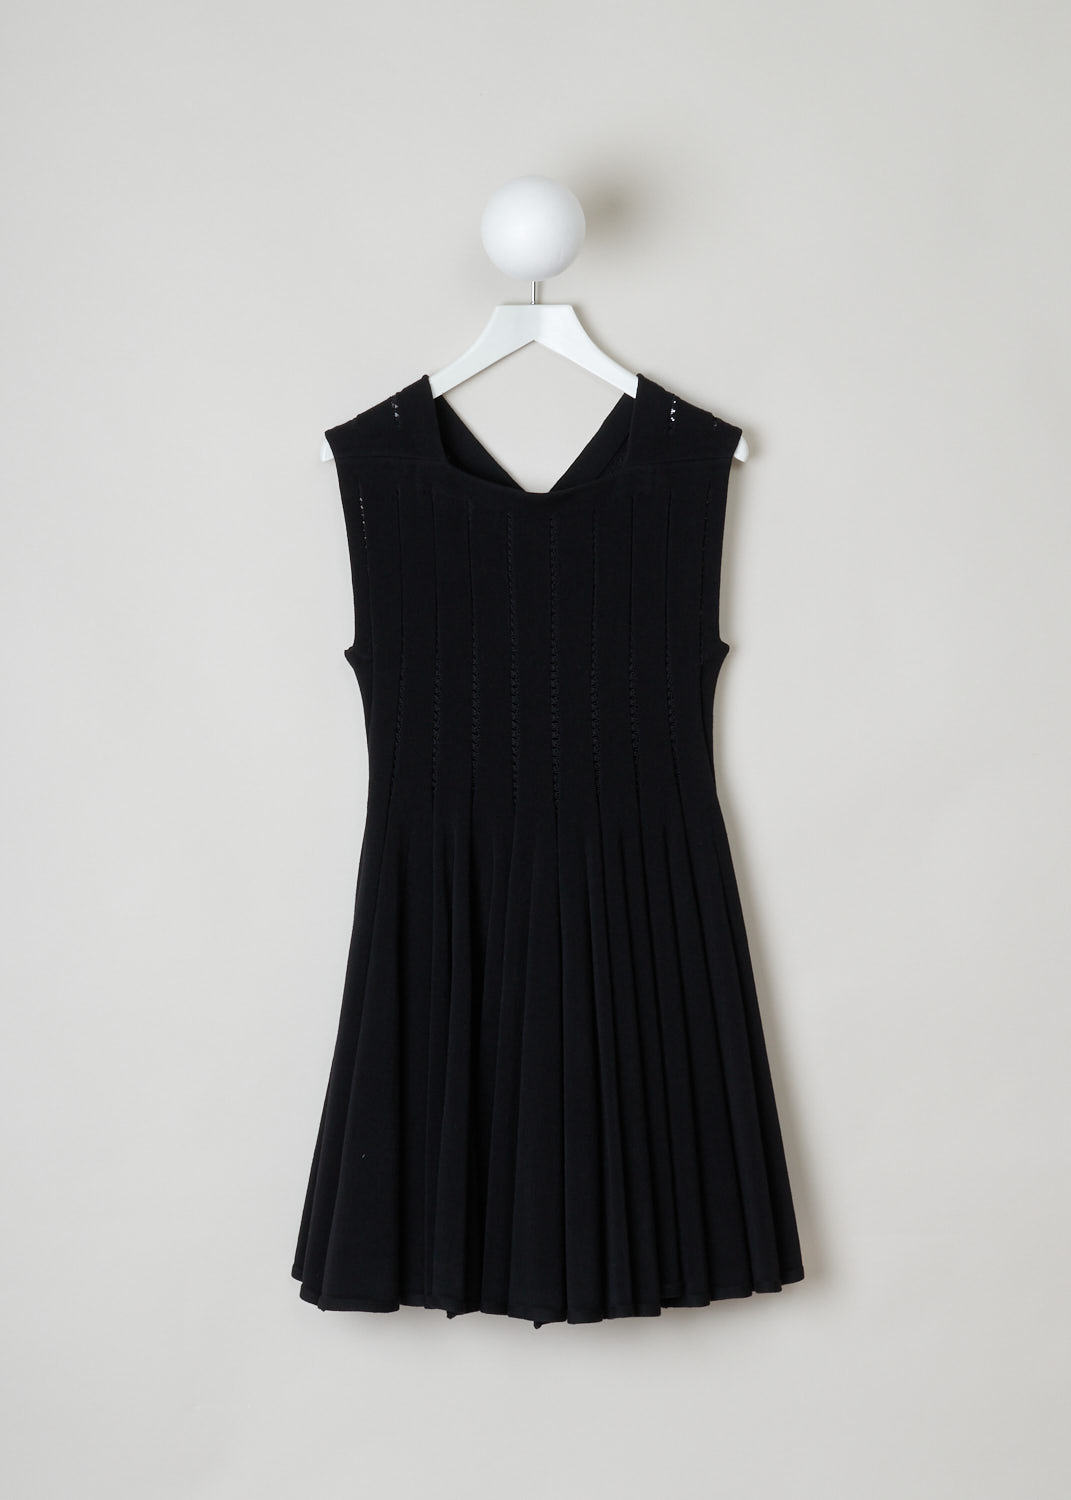 Alaïa, Black babydoll dress with embroidered detailing, 4W9RB20CM120_baby_doll_SM_noir_C999, black, front, Black babydoll dress featuring a square cut neckline on the front and a v-shape on the back. The top of this dress is put together in strips of fabric held together by the black embroidery. The skirt of this model is designed with knife pleats and will flare out. The length of this model is thigh-height. Your fastening option on this model is the concealed zipper on the back.  